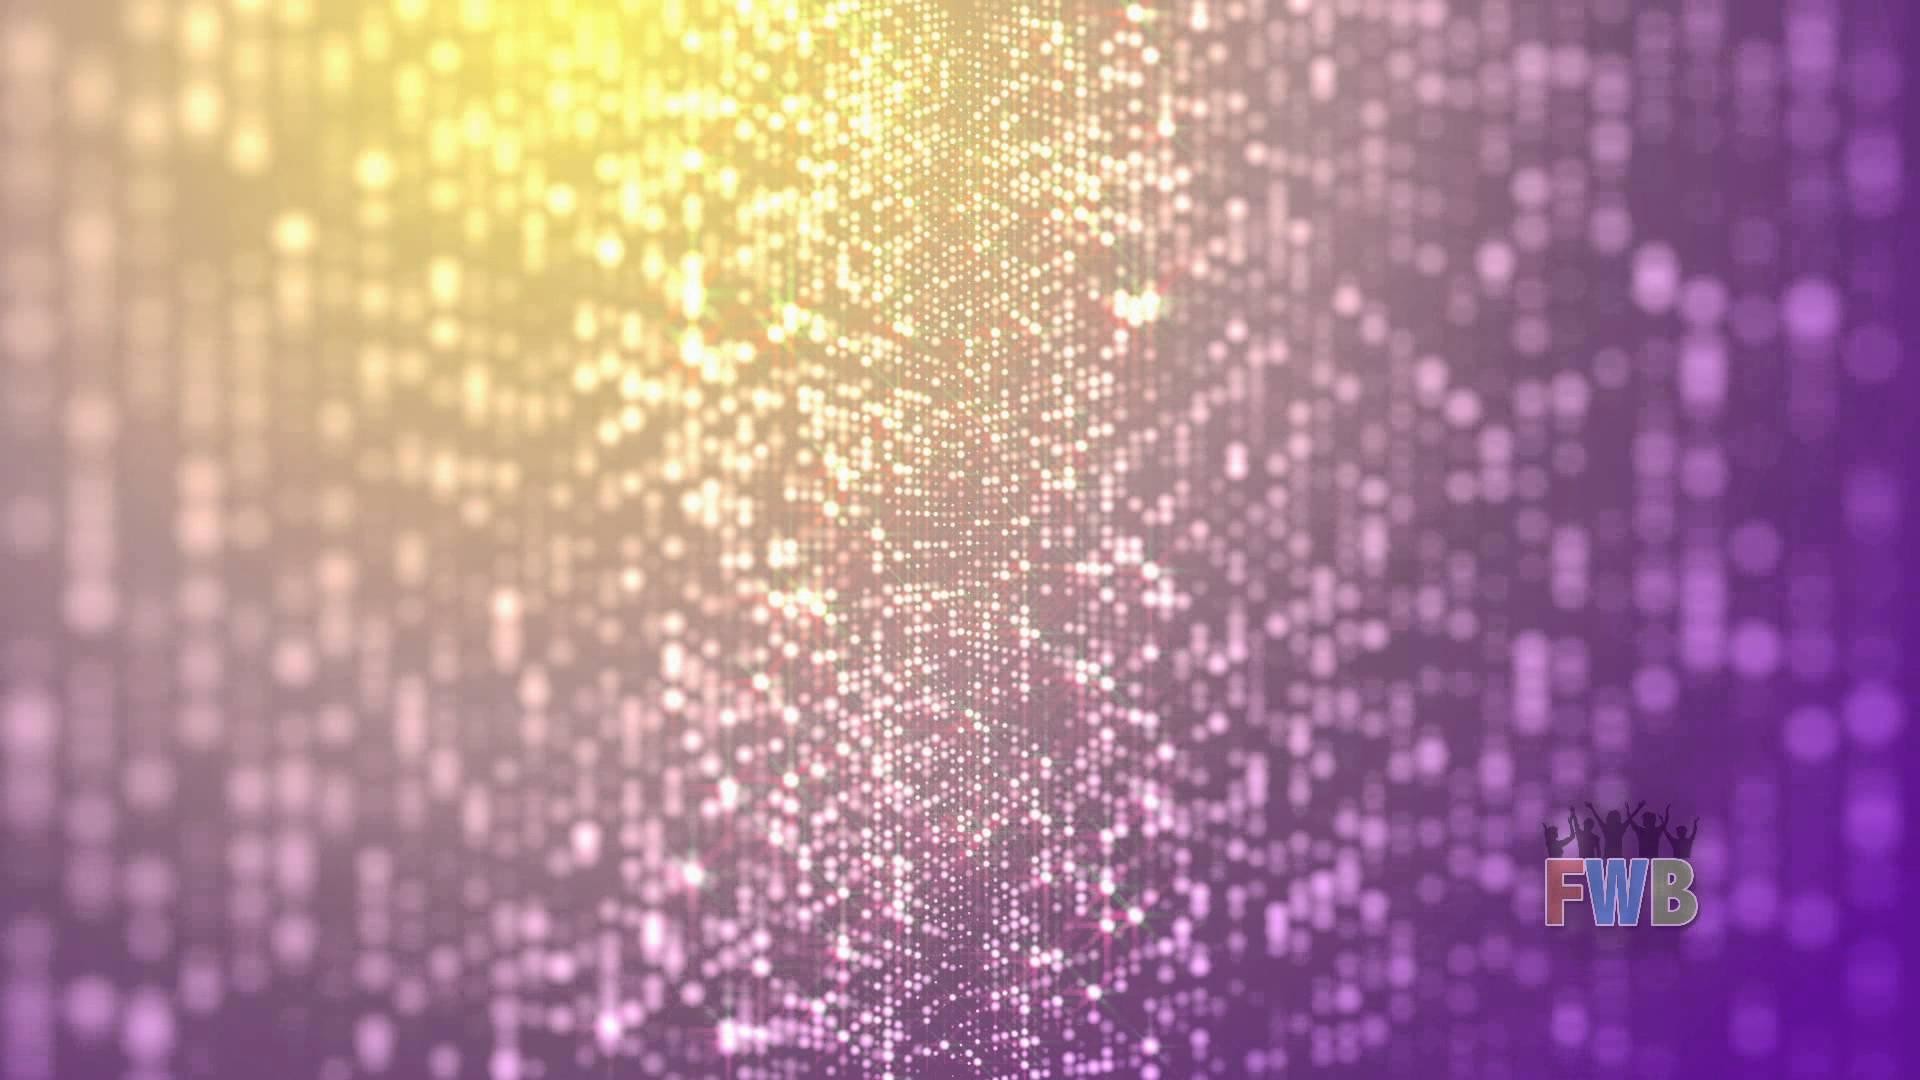 Glitter Backgrounds Free Download